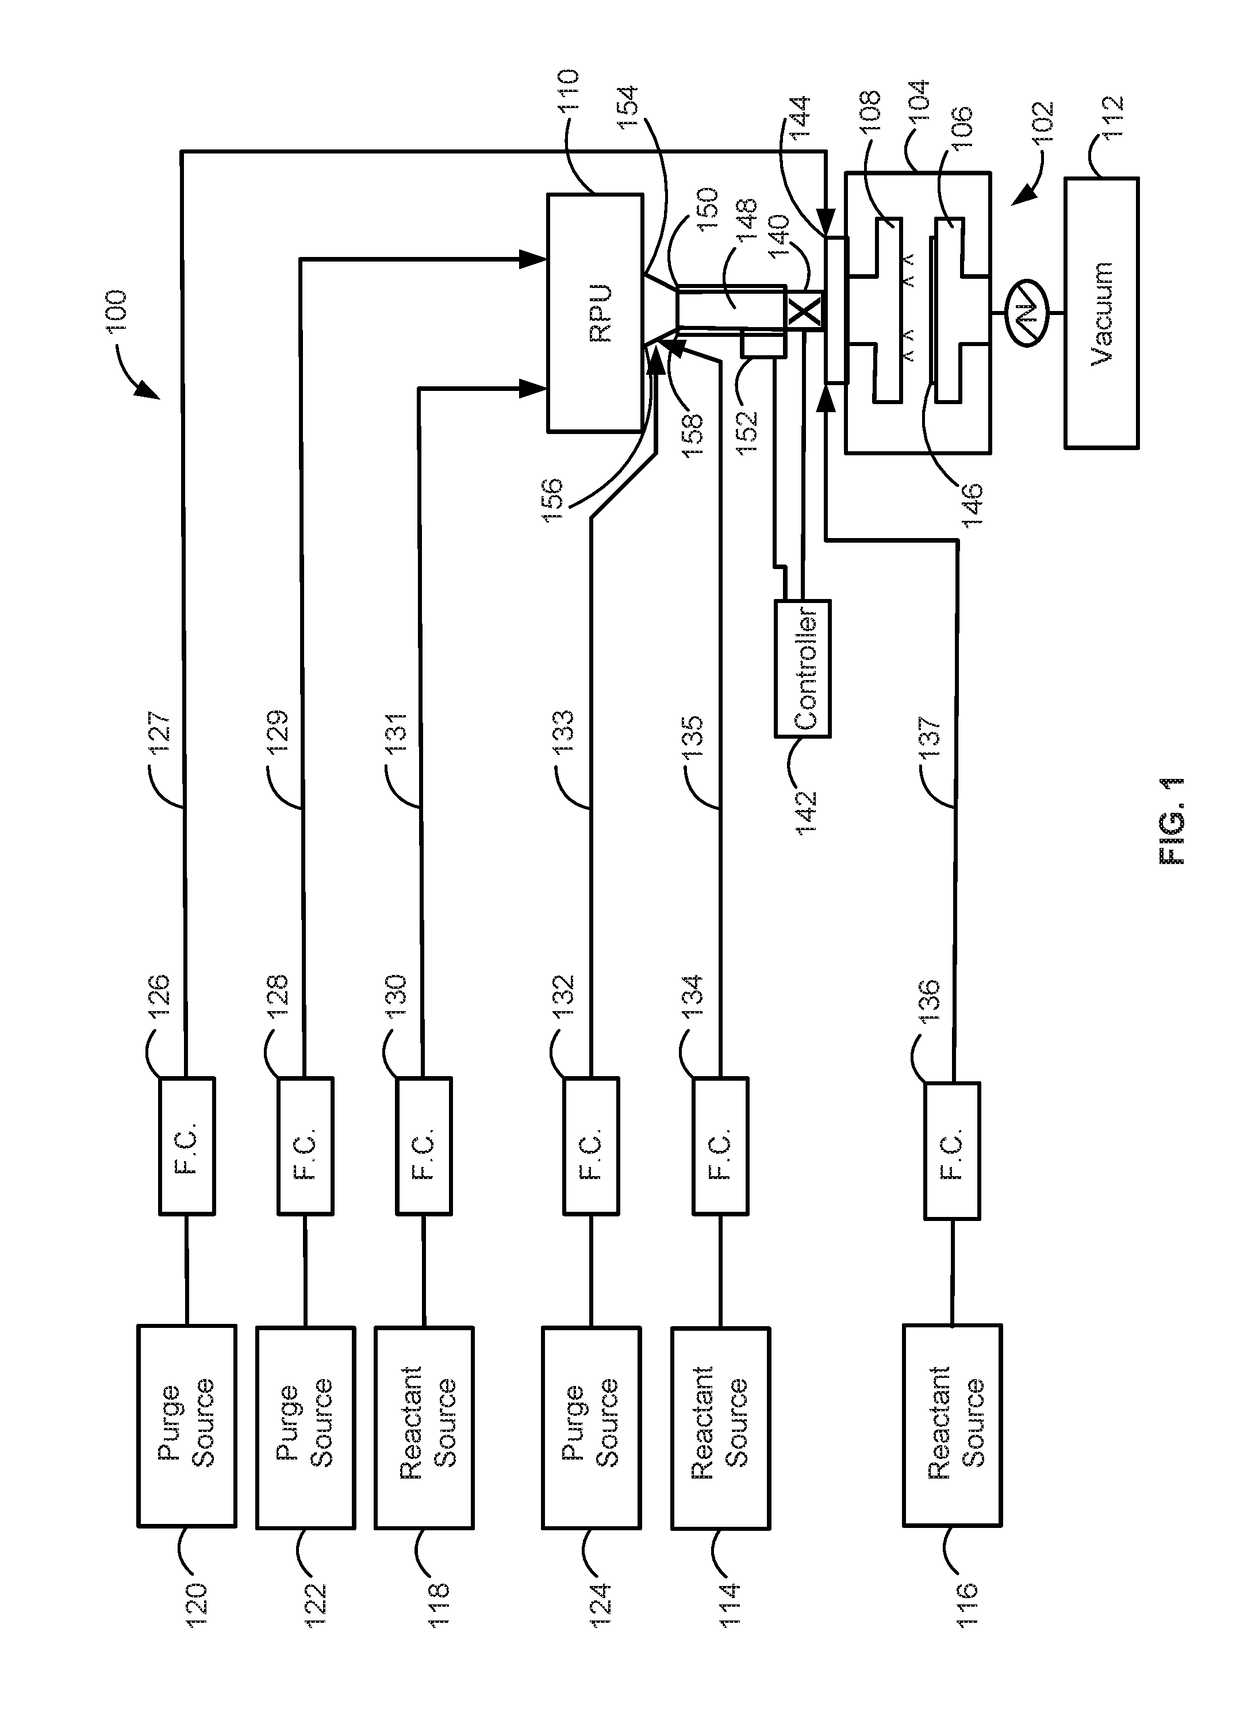 Method and system for in situ formation of gas-phase compounds